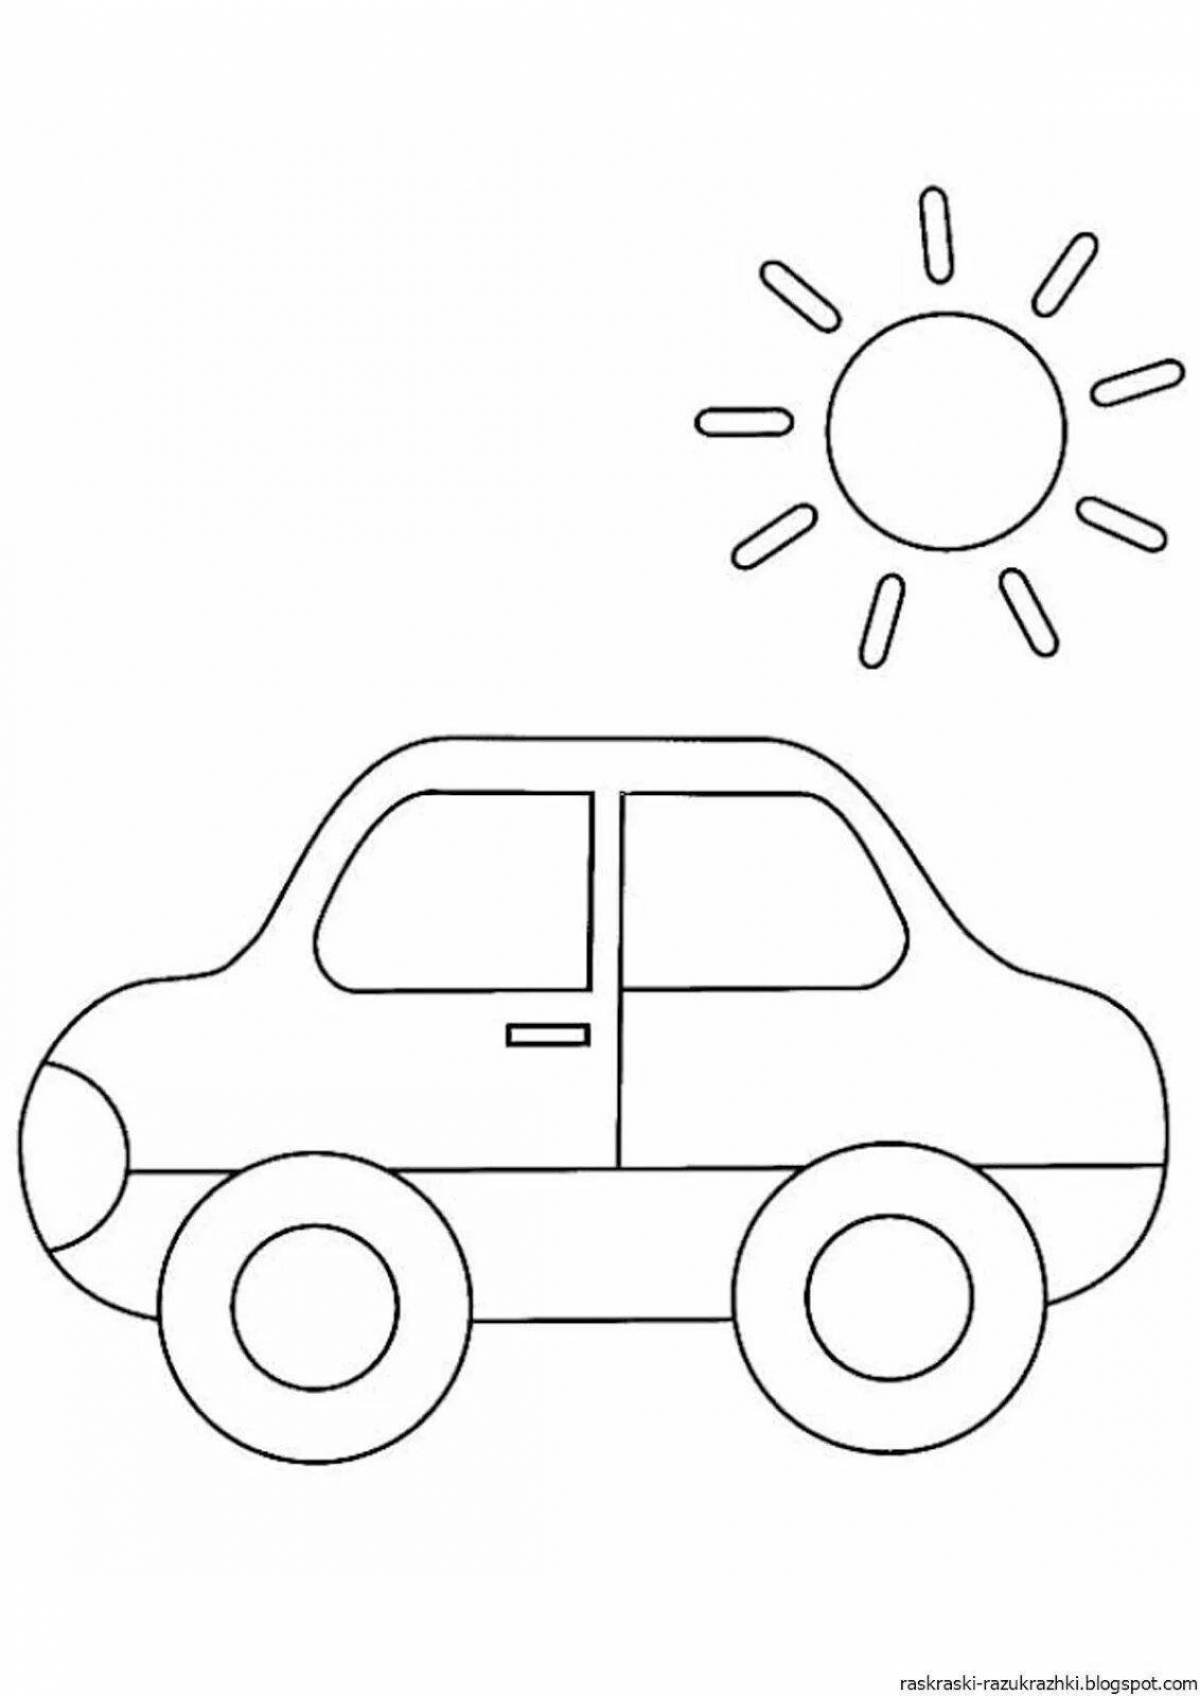 Cute simple toy car coloring book